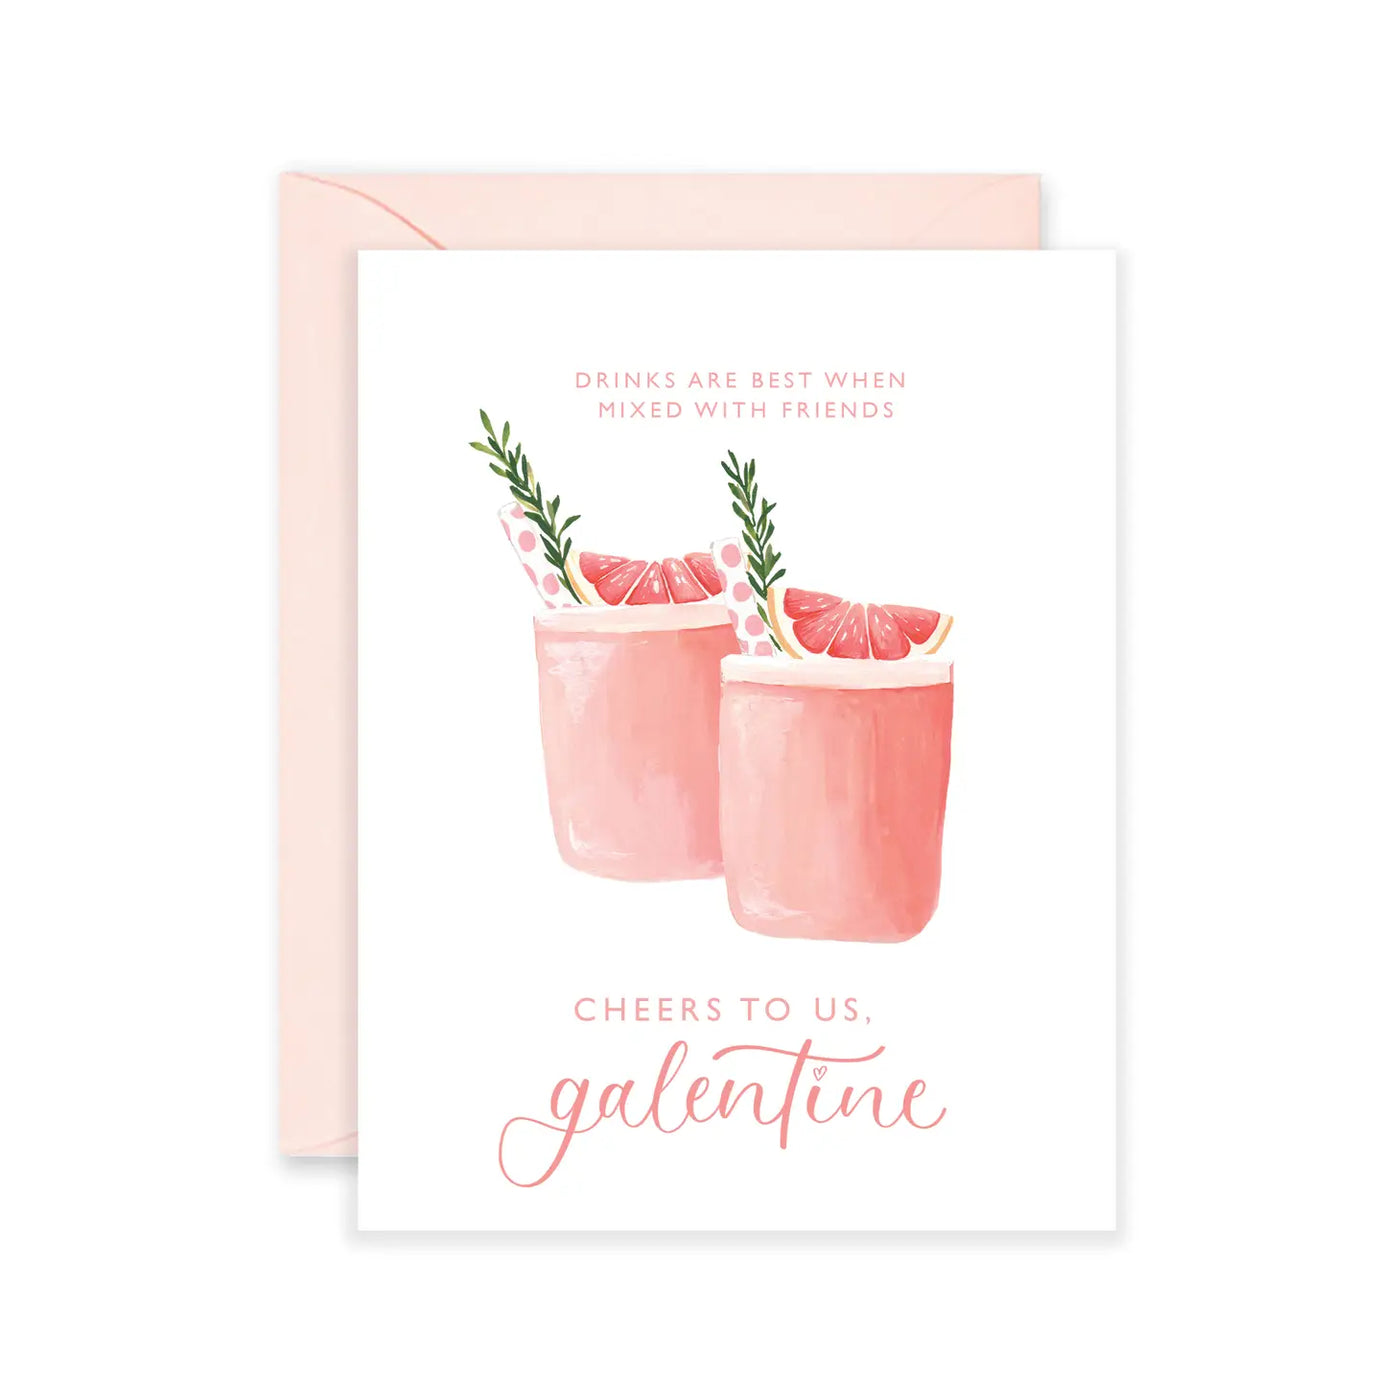 White card with two pink cocktails with fruit slices and herbs. Features the phrase Drinks are best when mixed with friends, Cheers to us galentine!